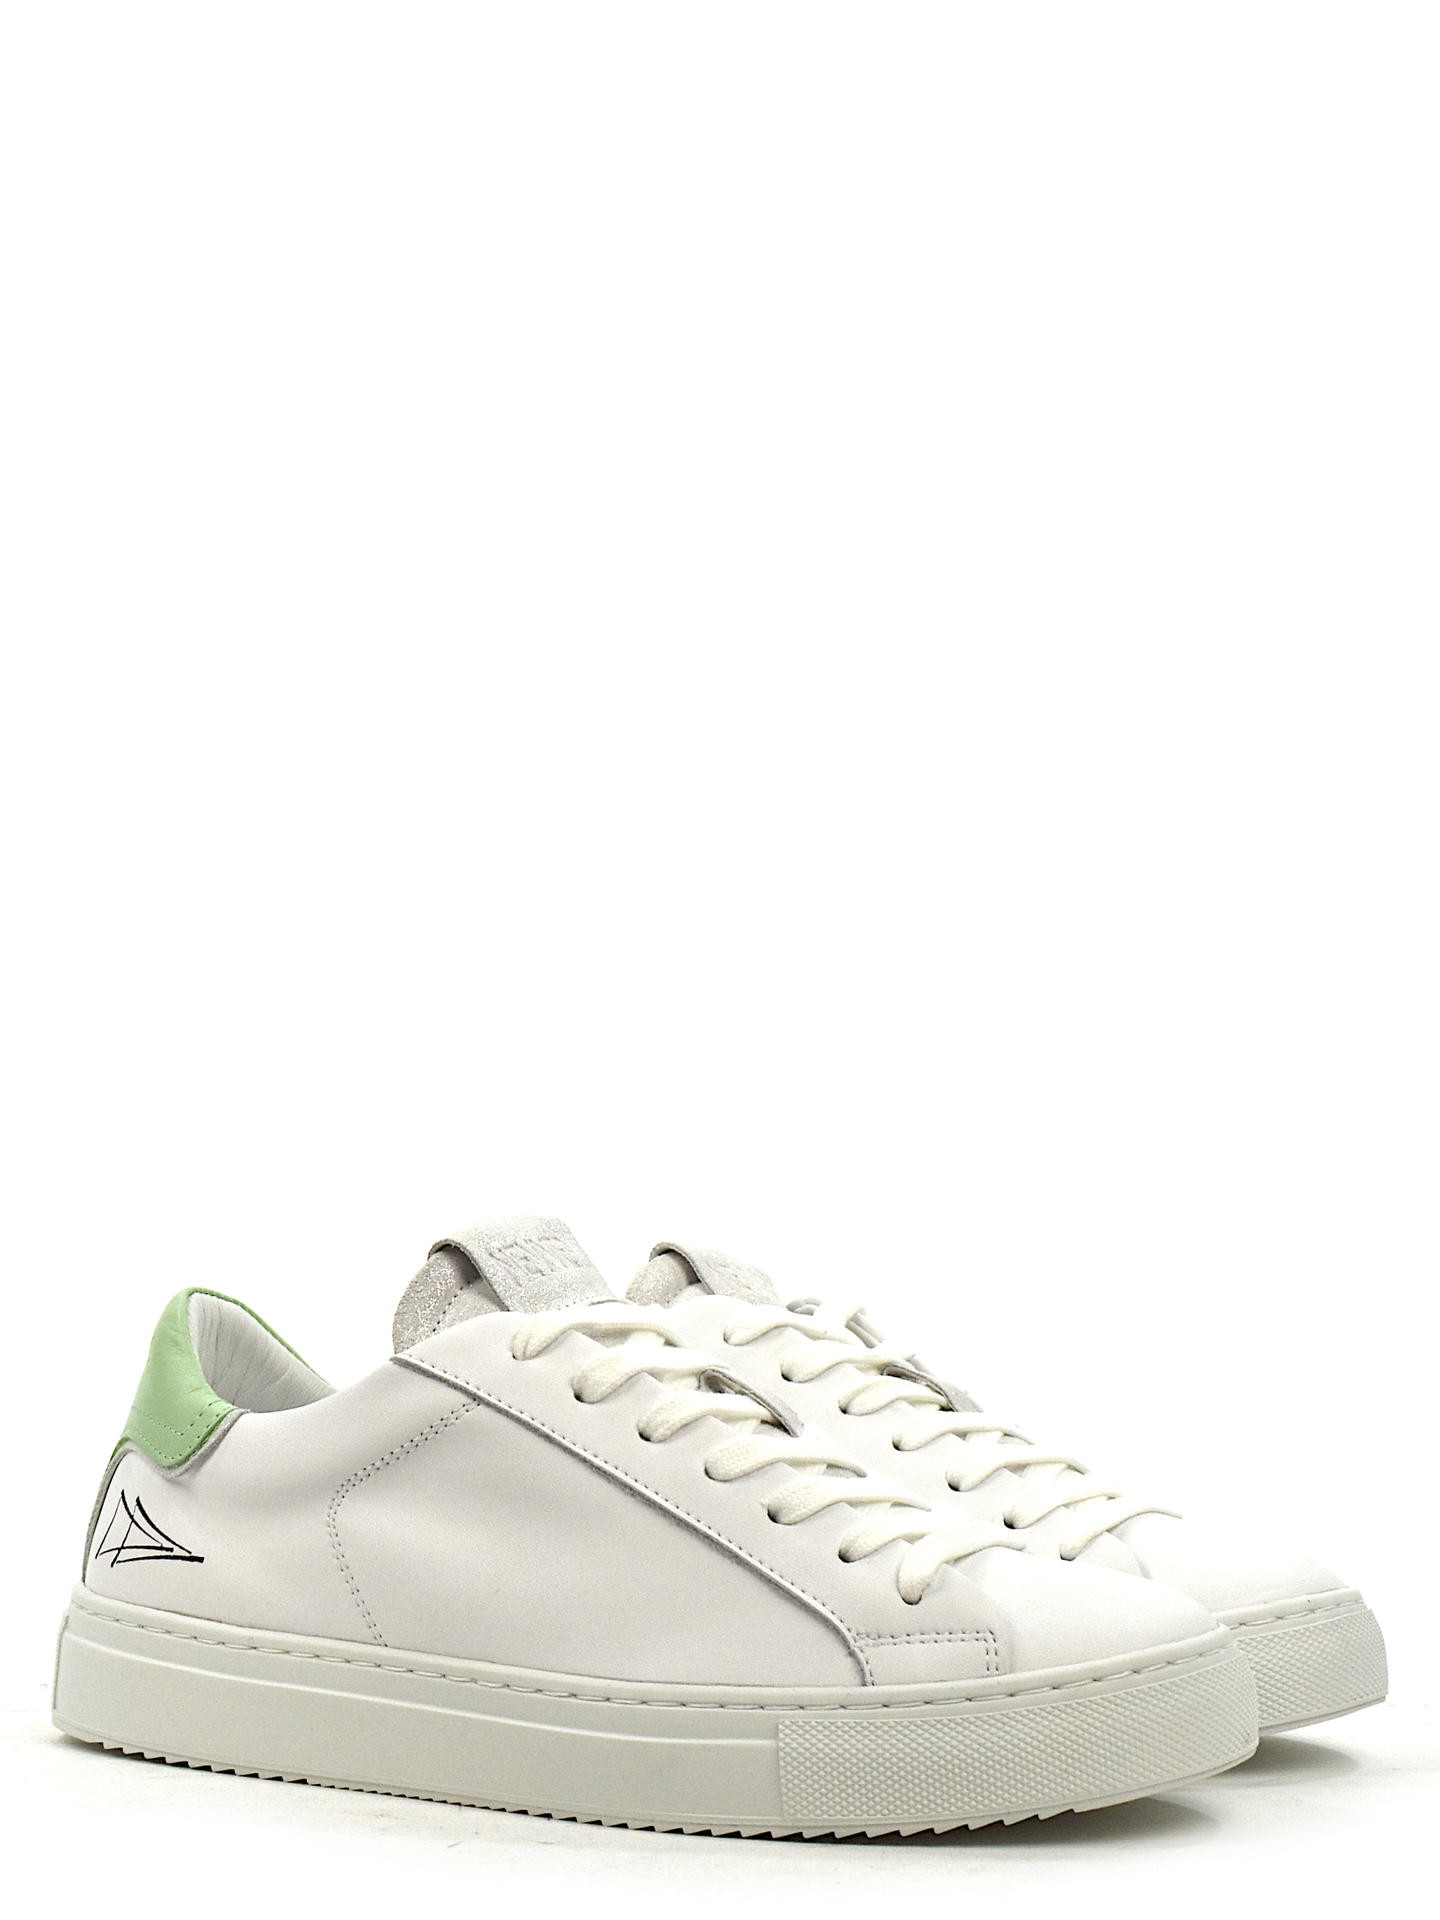 SNEAKERS NEVVER CILE BIANCO